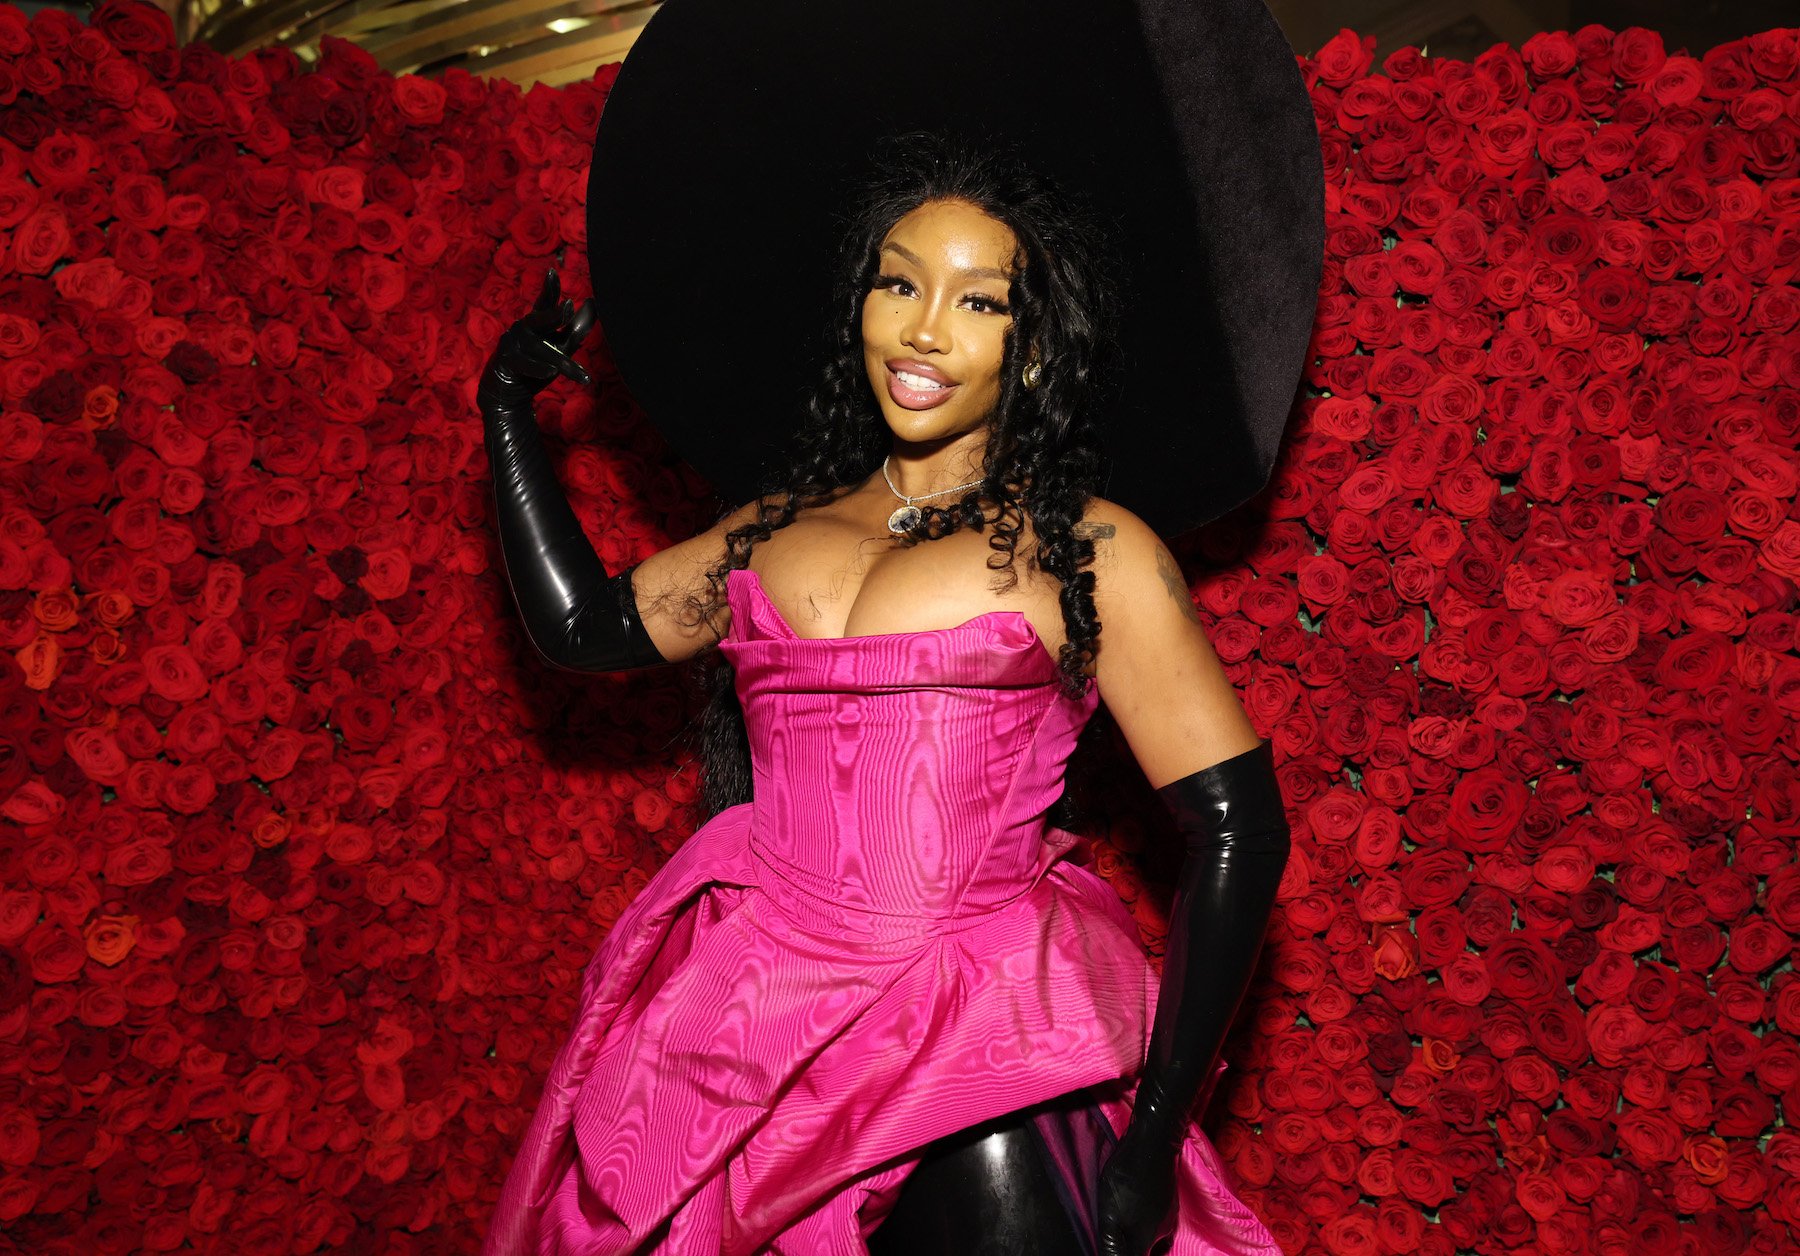 SZA, who admitted Princess Diana inspired her new album cover, posing for a photo wearing a black hat and pink dress